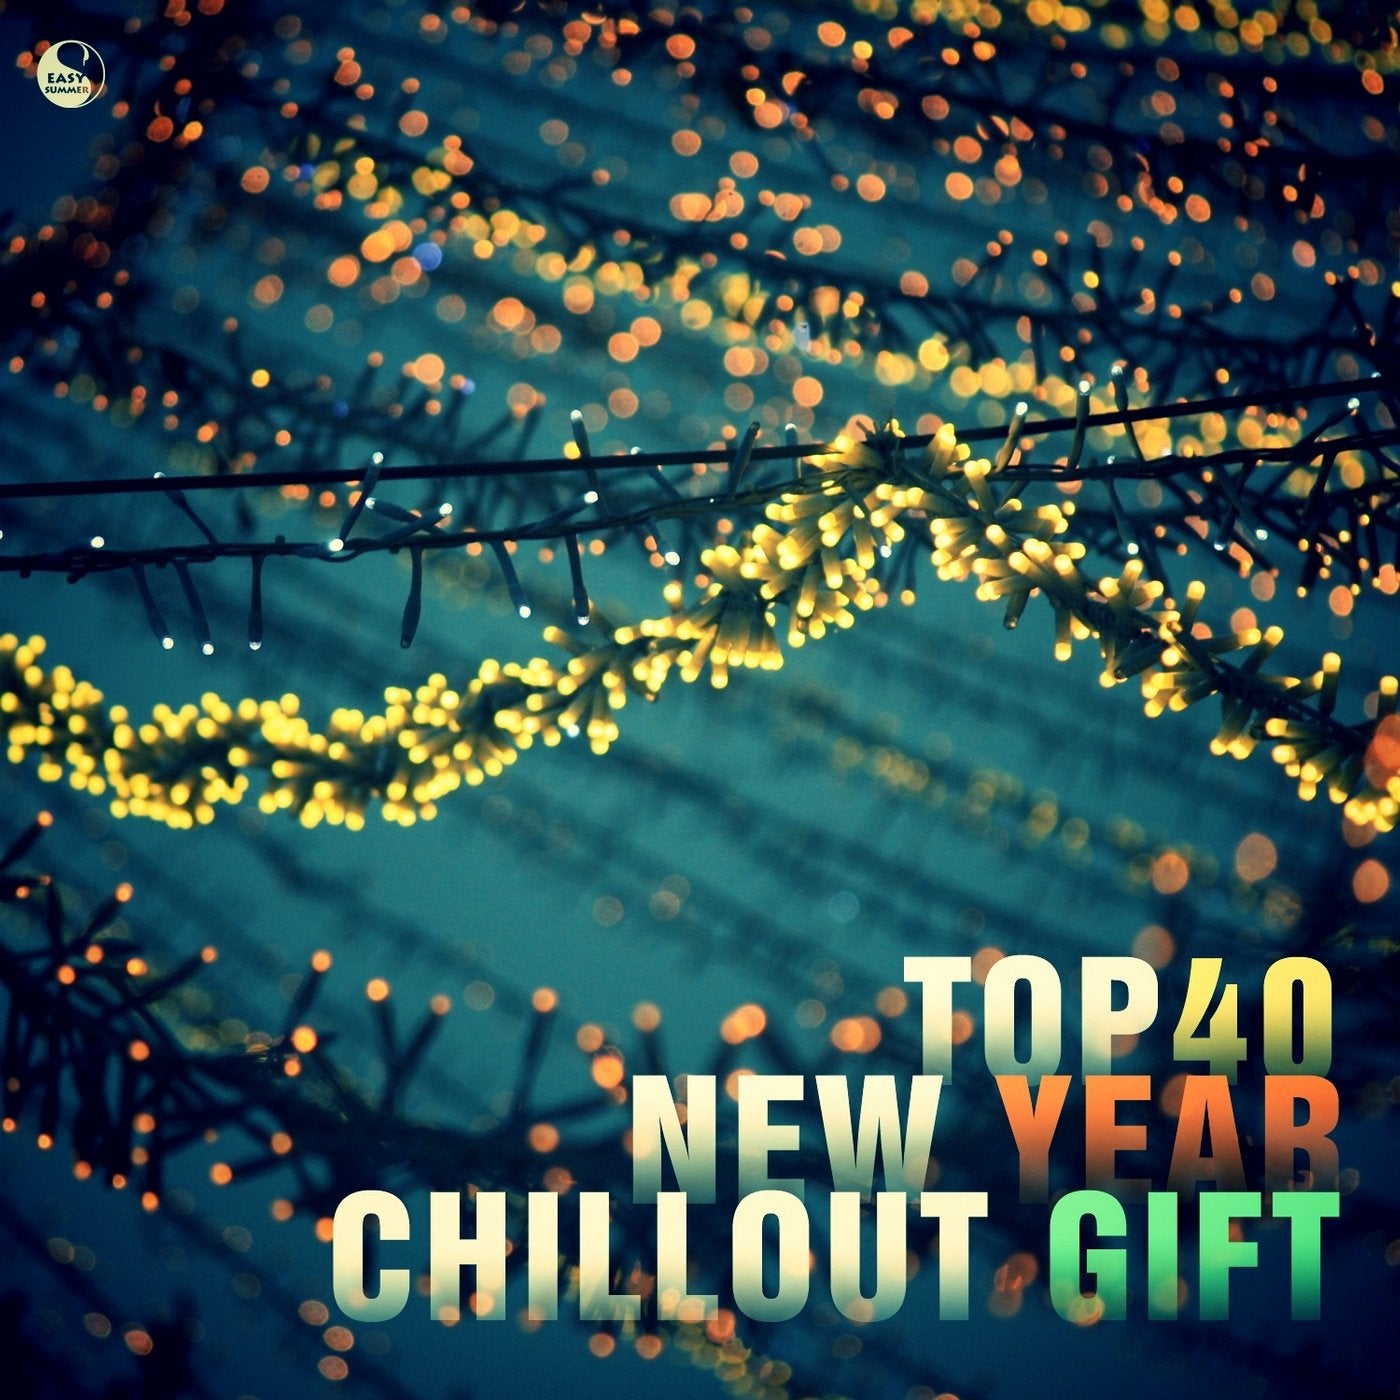 Top 40 New Year Chillout Gift